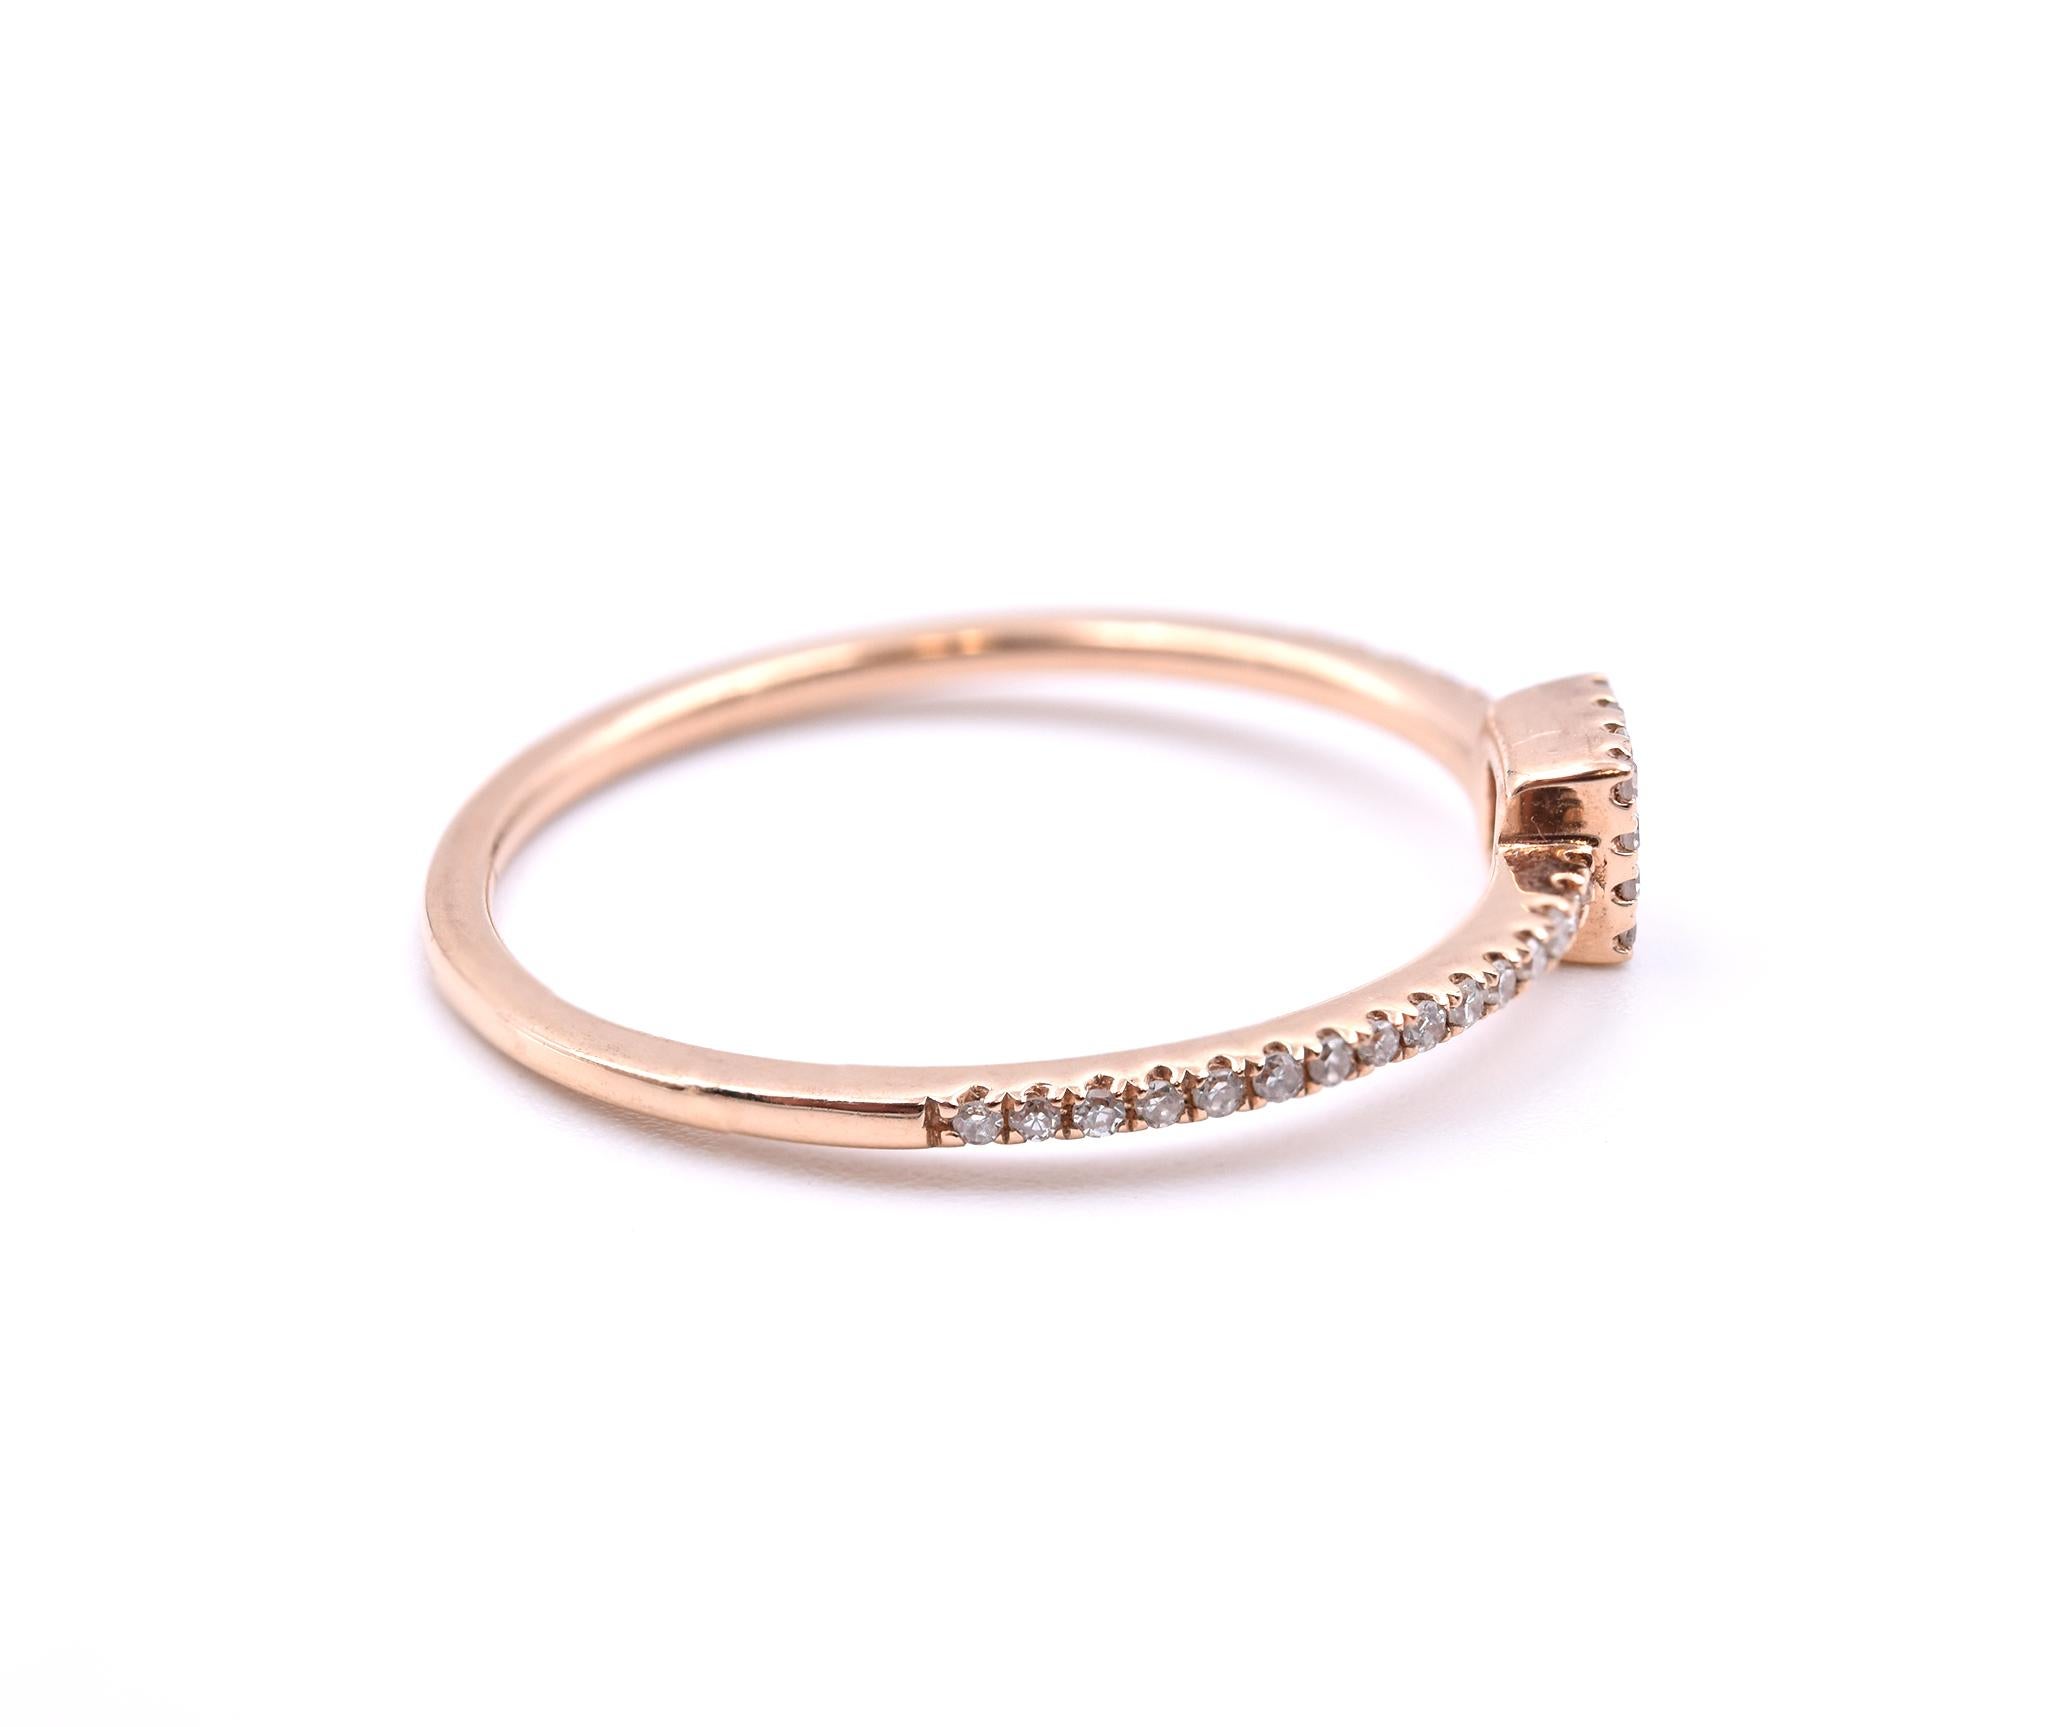 Material: 14K rose gold
Diamonds: 42 round brilliant cut = .21cttw
Color: H
Clarity: SI1
Diamond: 1 round brilliant cut = .02ct
Color: H
Clarity: SI1
Ring Size: 7 (please allow up to 2 additional business days for sizing requests)
Dimensions: ring